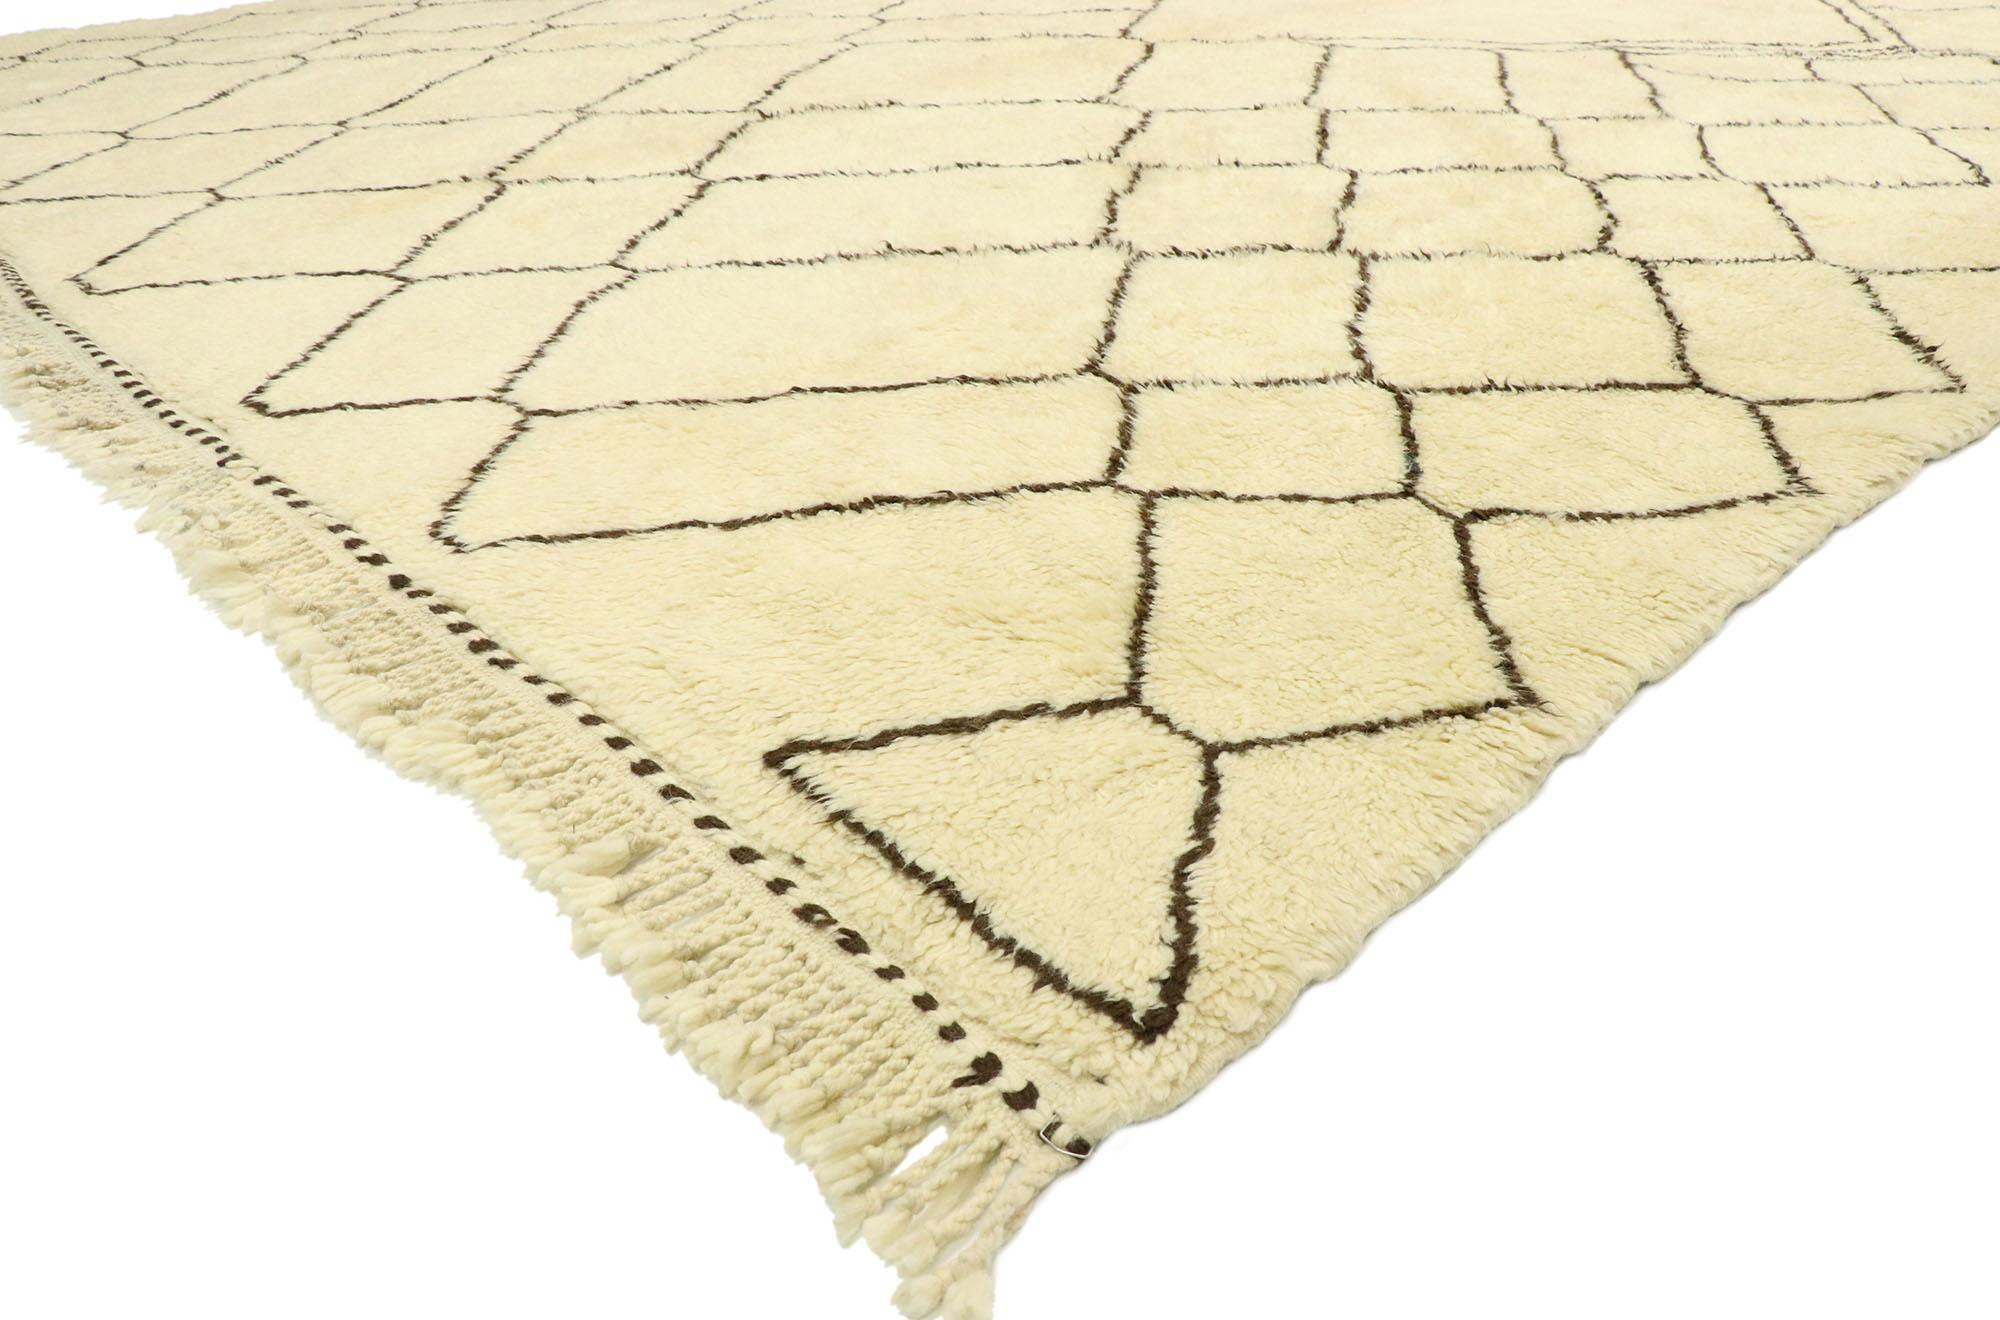 20673, new contemporary Berber Moroccan rug with Minimalist Mid-Century Modern style. This contemporary Moroccan oversize rug displays a Minimalist Mid-Century Modern style. This plush Moroccan oversize area rug is always chic, yet sophisticated.